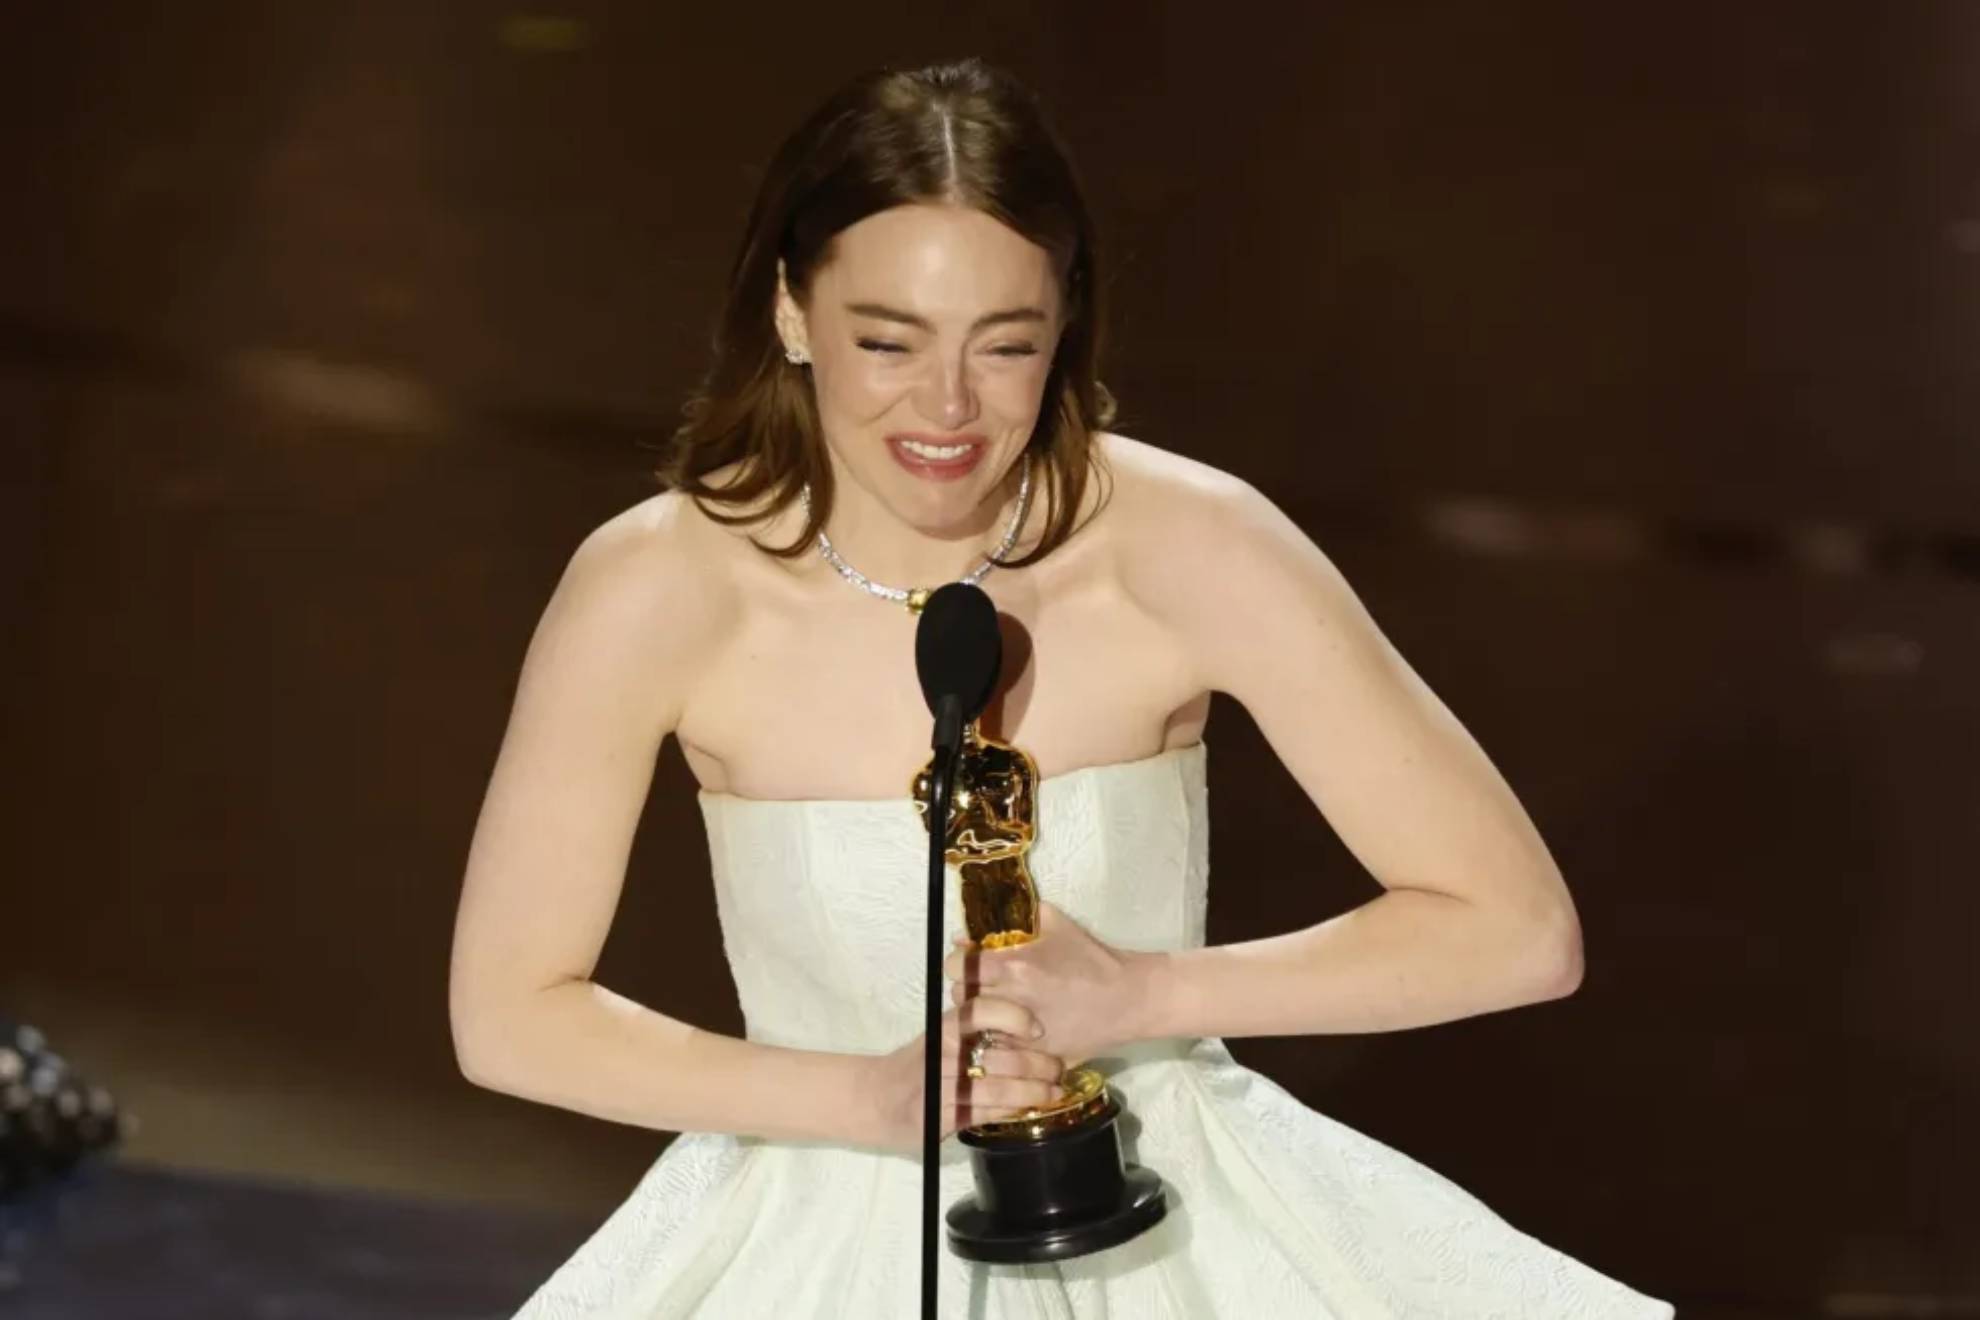 Emma Stone during her Oscars victory